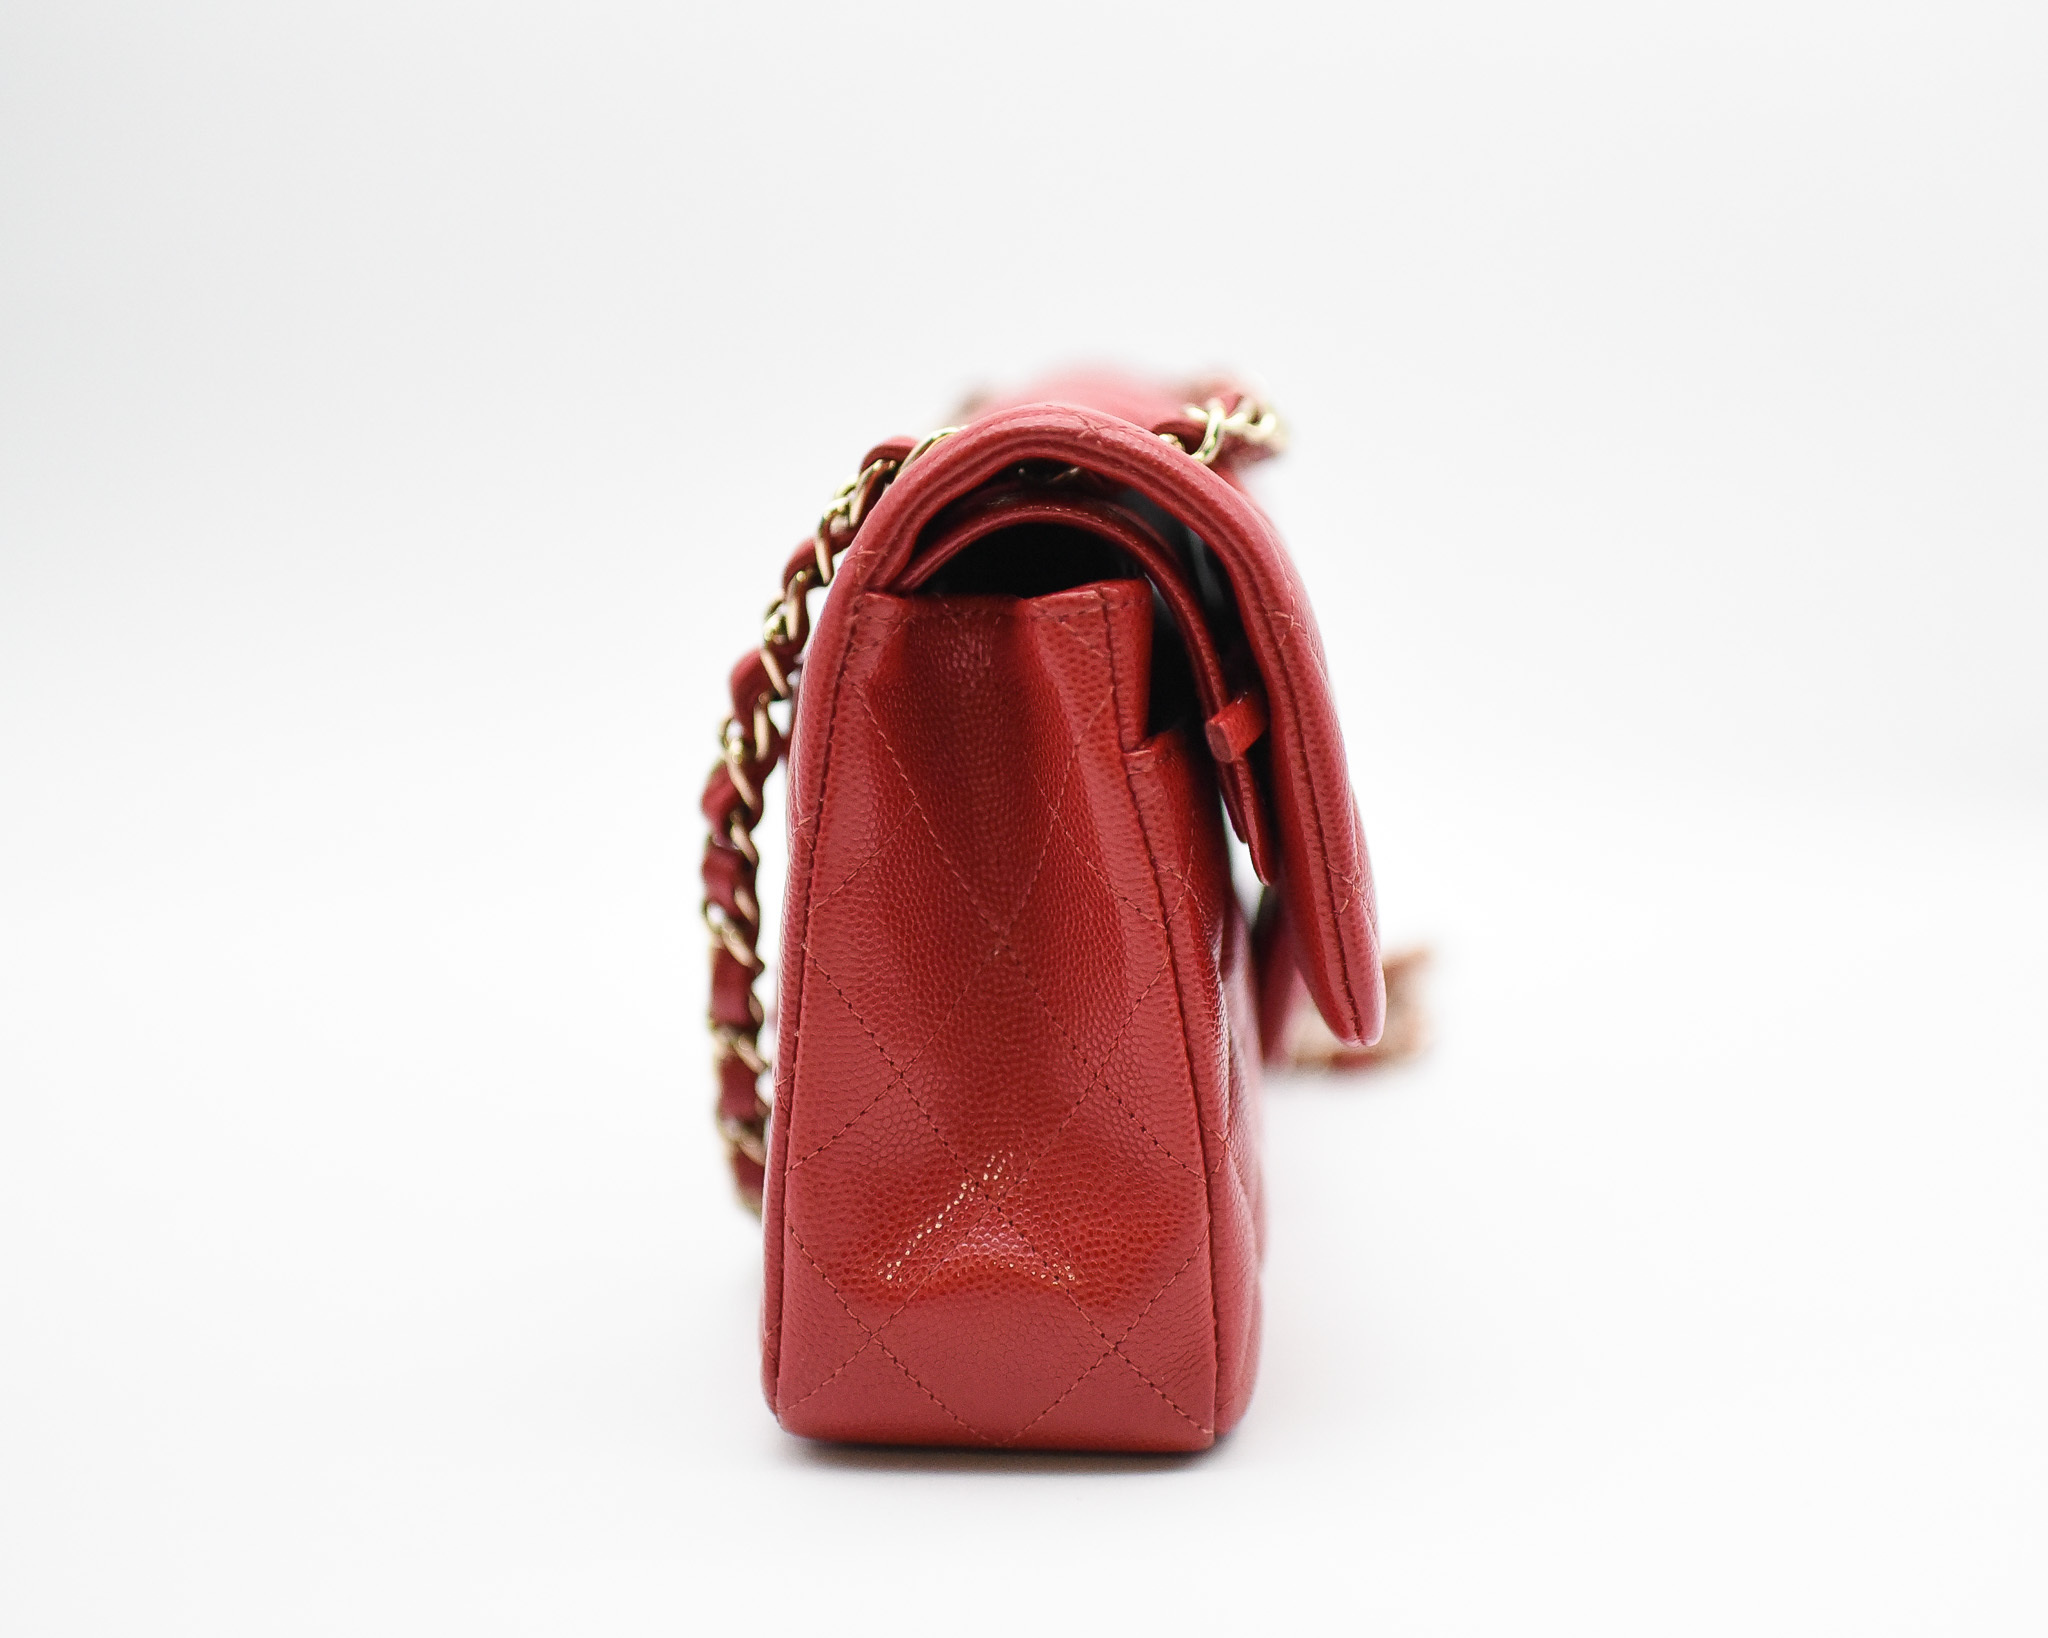 Chanel Classic Flap Small, Red Caviar Leather with Gold Hardware